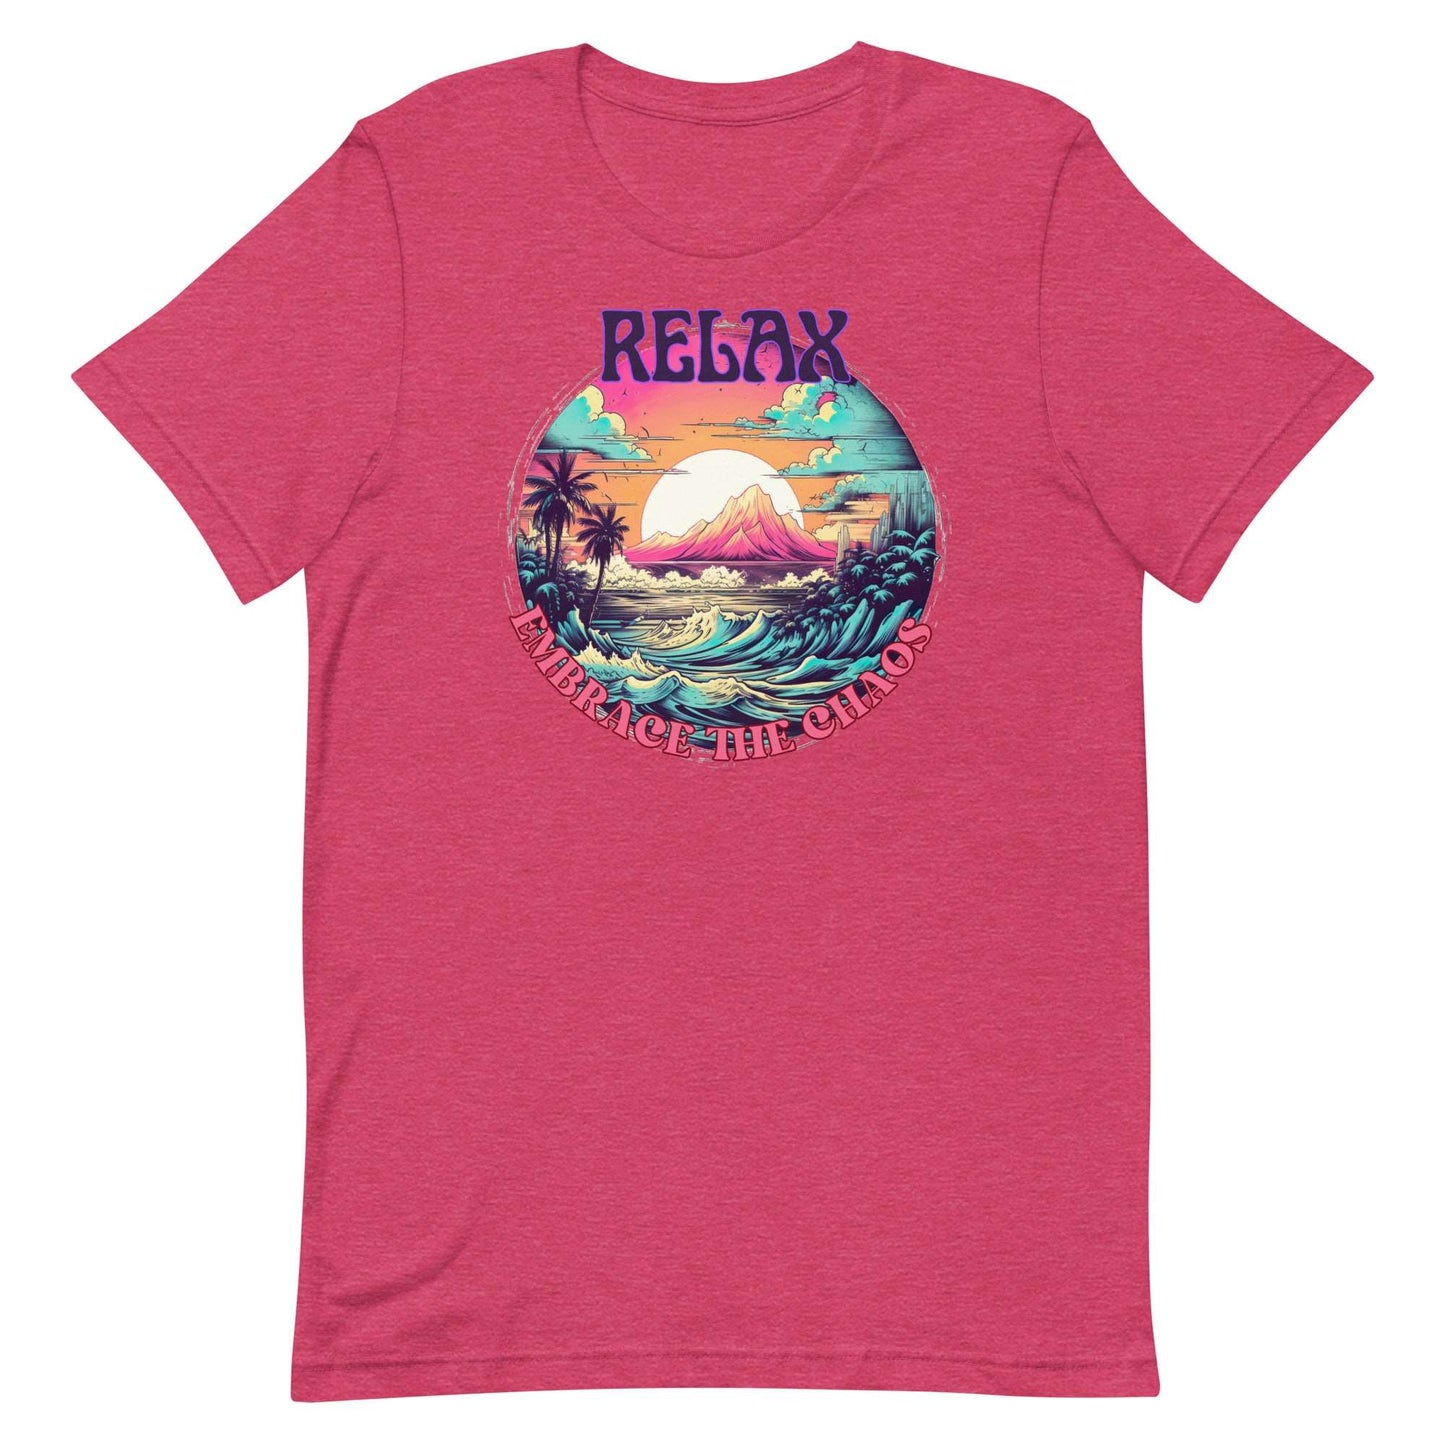 Relax, Embrace the Chaos. Unisex T-shirt